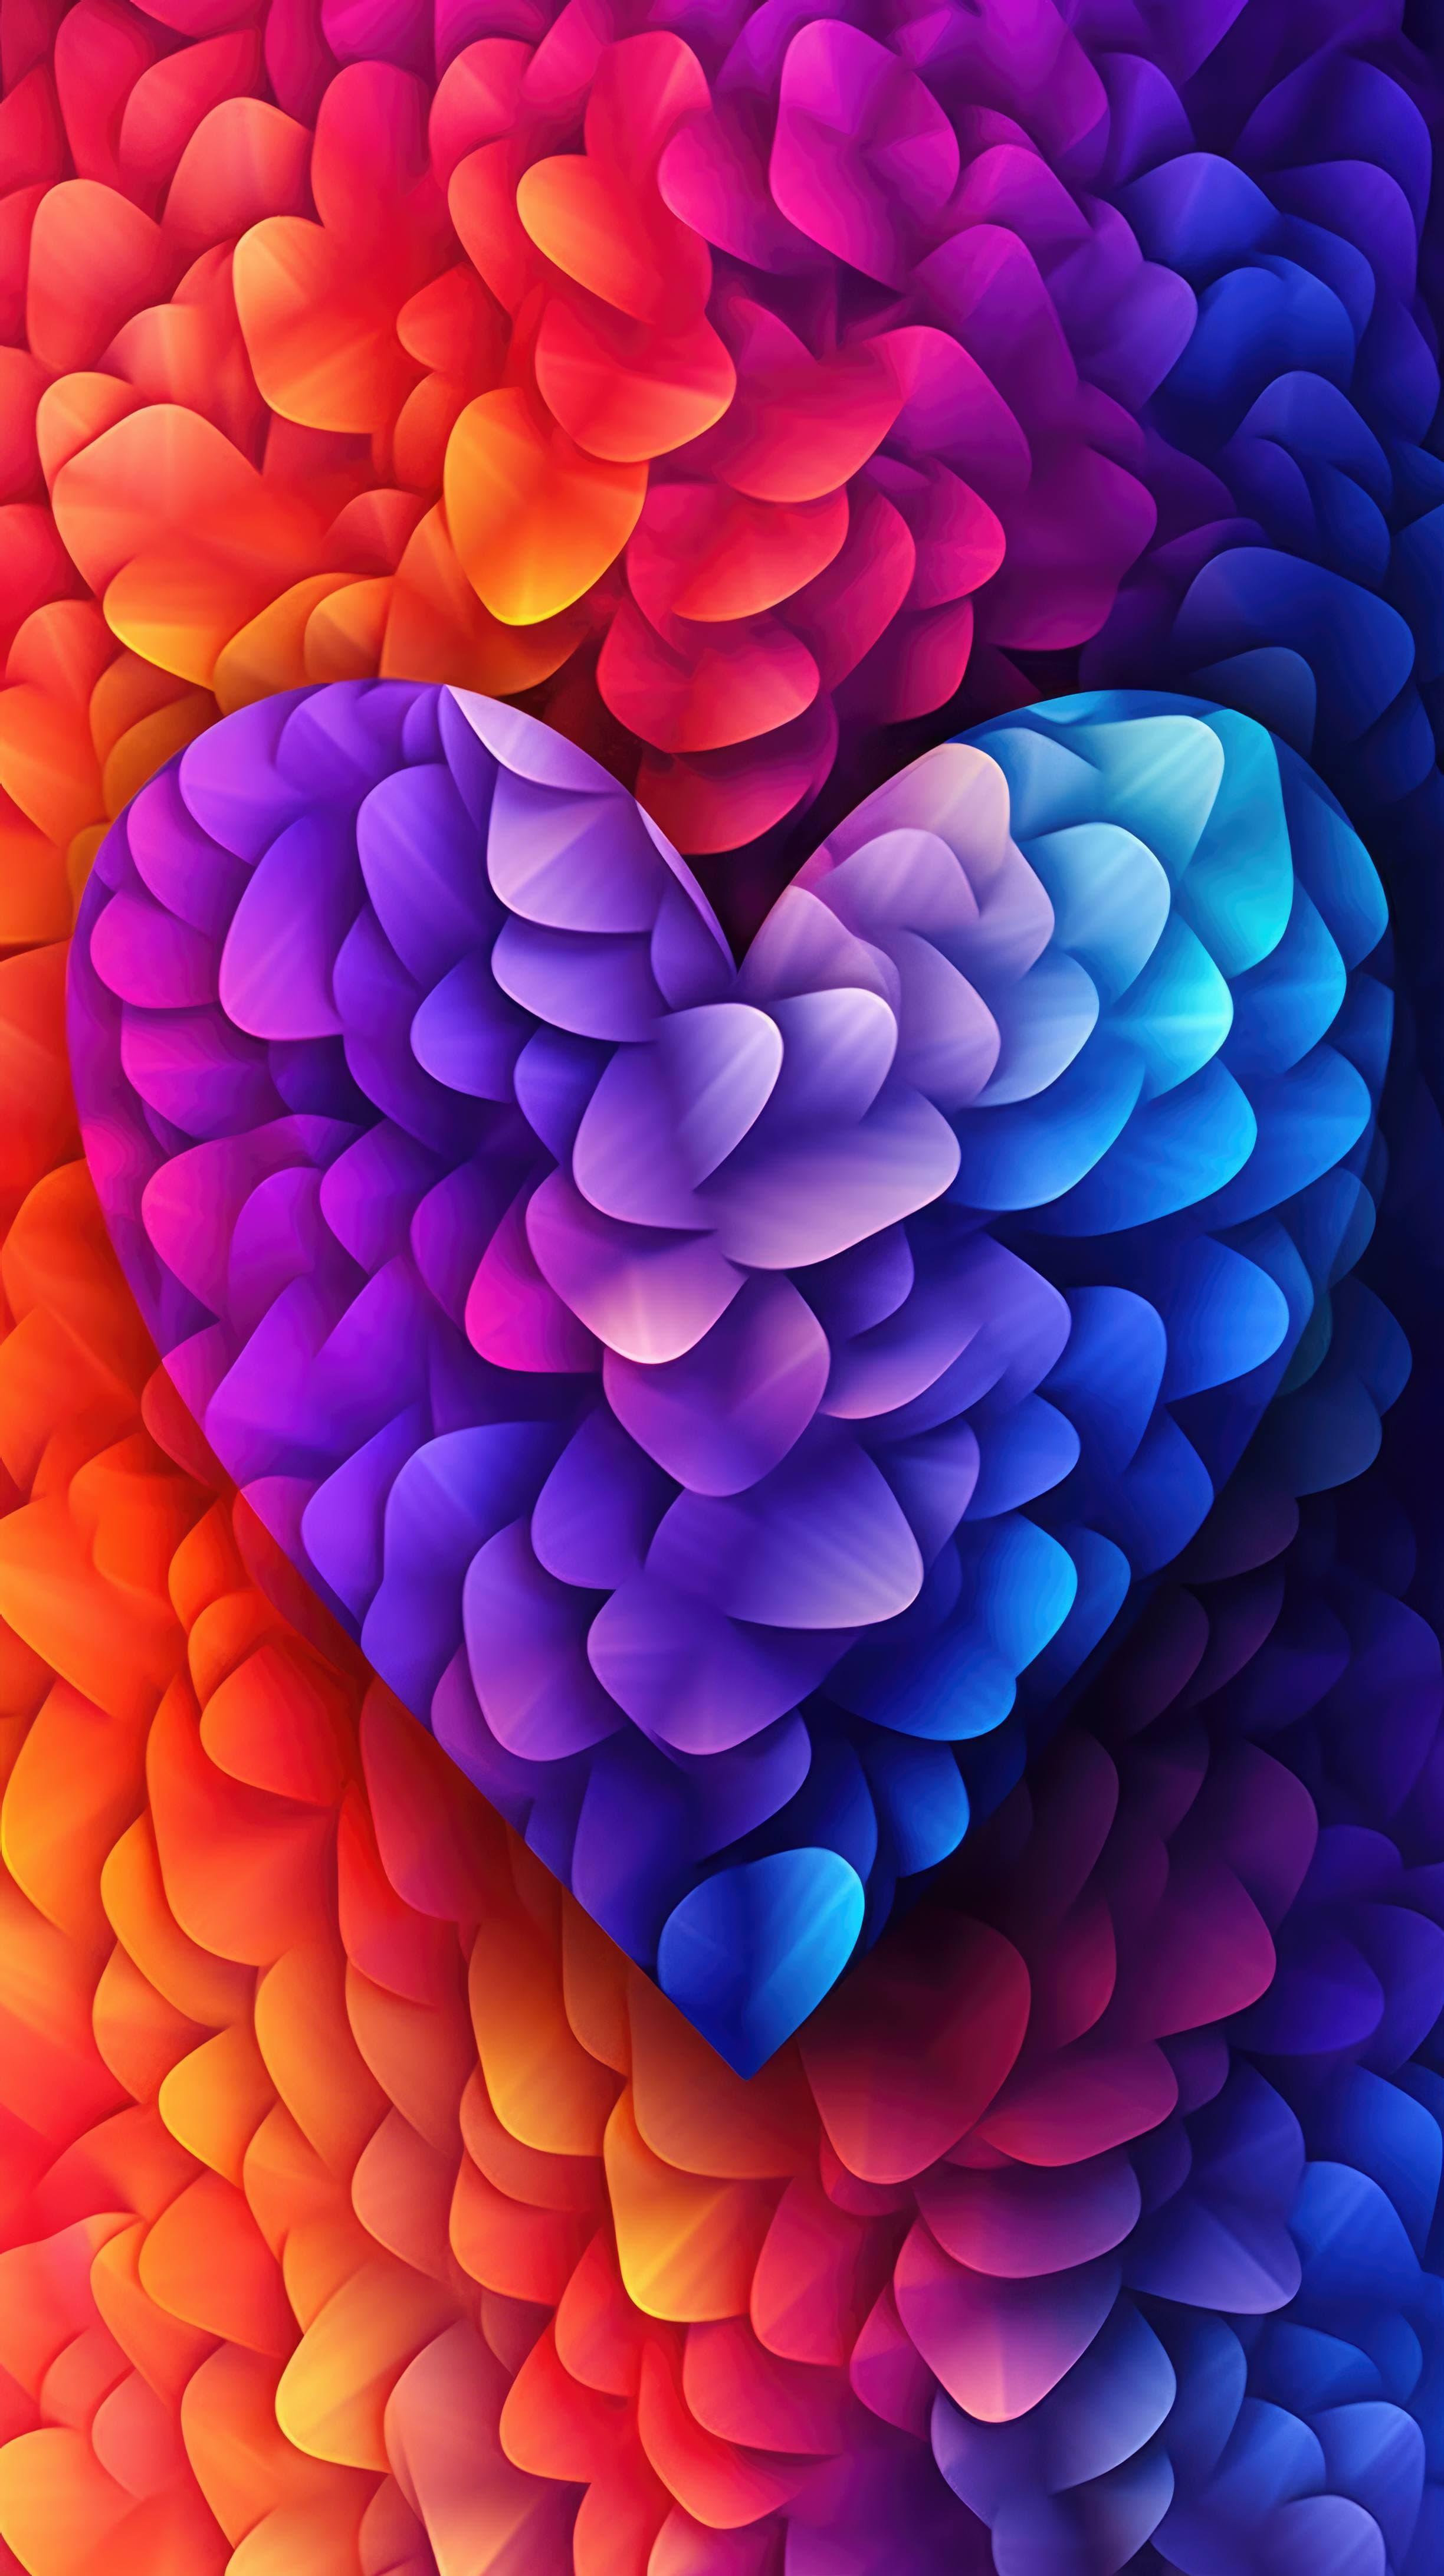 A 4k Ultra HD Mobile Wallpaper With An Abstract Heart Shaped